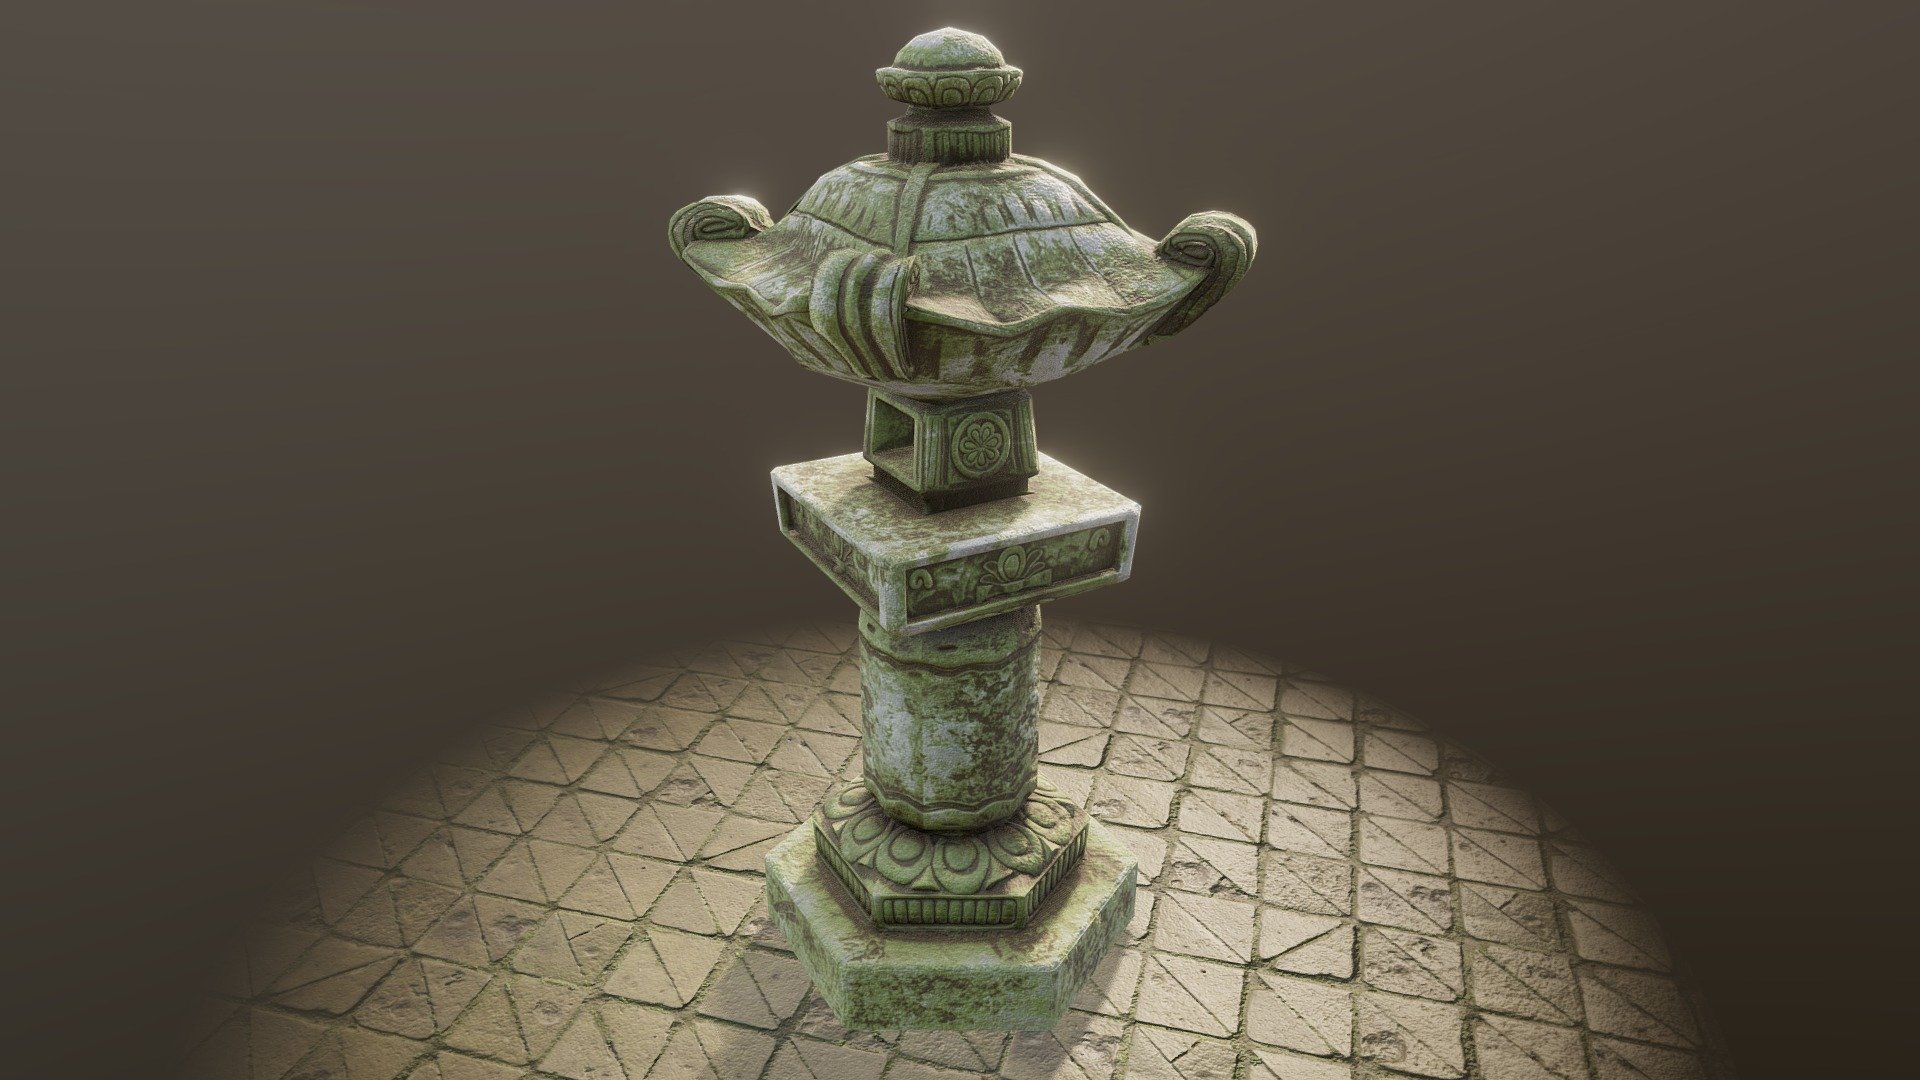 This is the first model I havve made for a Shogun themed scene I am working on right now 3d model